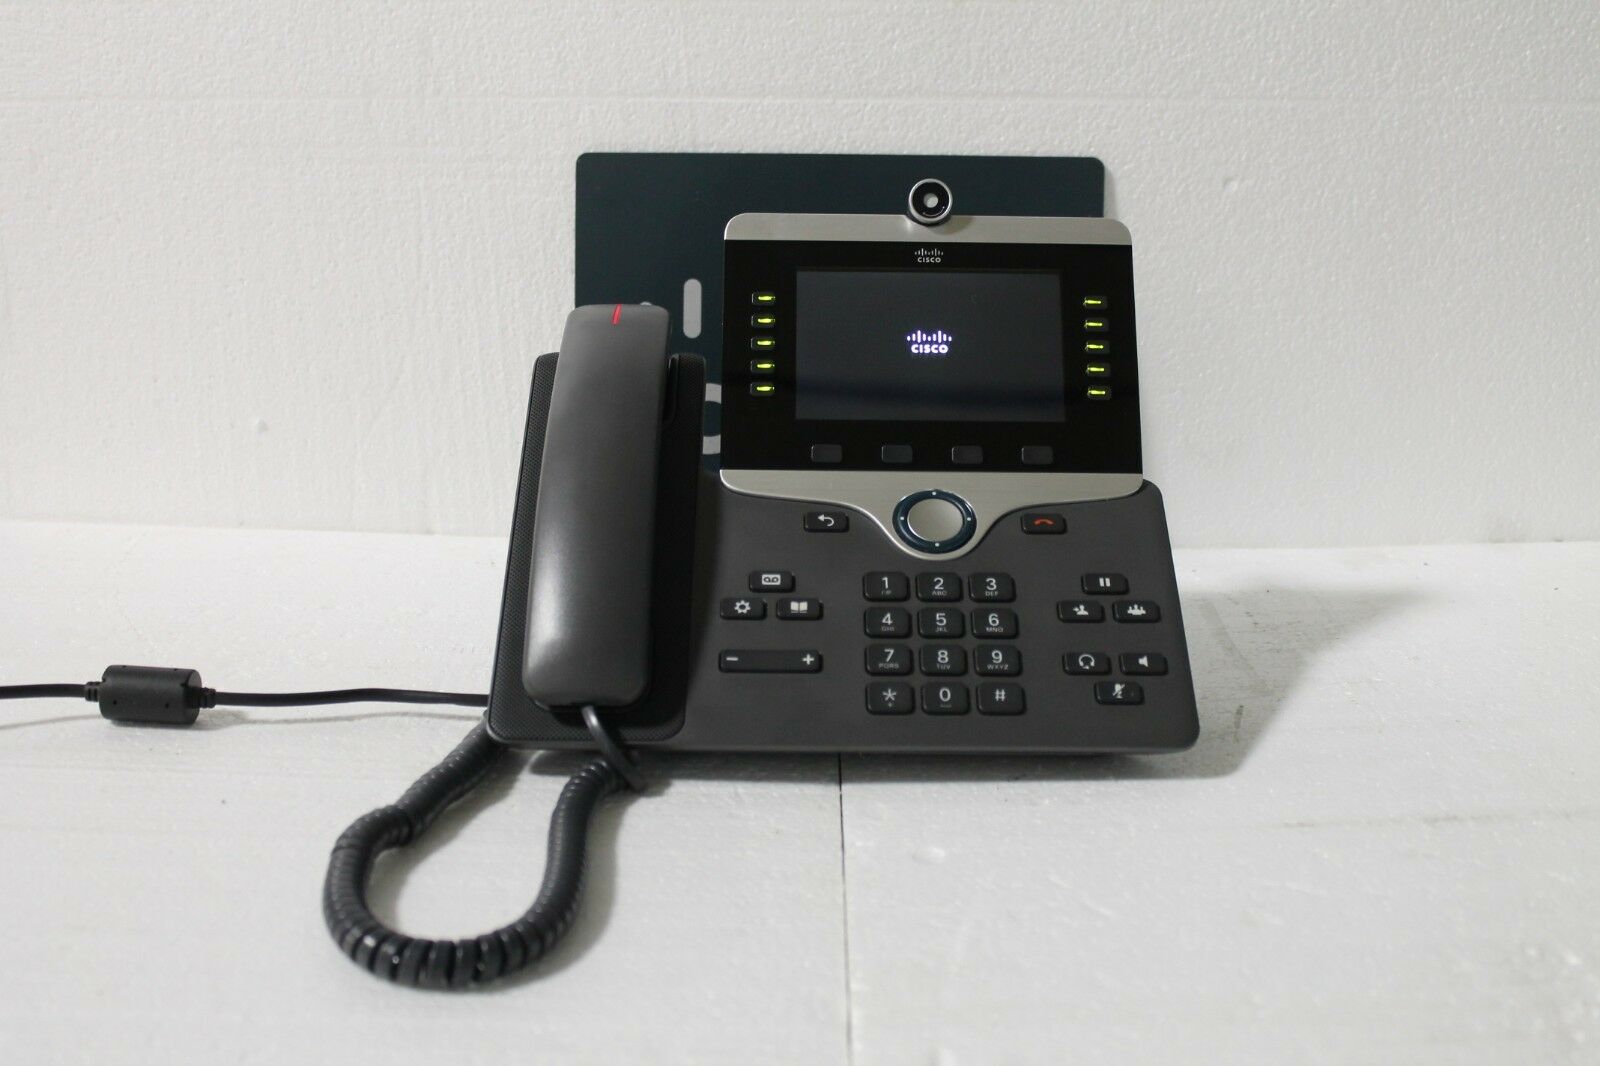 Cisco 8800 Ser. Cp-8865-k9 Unified Ip Endpoint Voip Video Phone W Camera & Stand